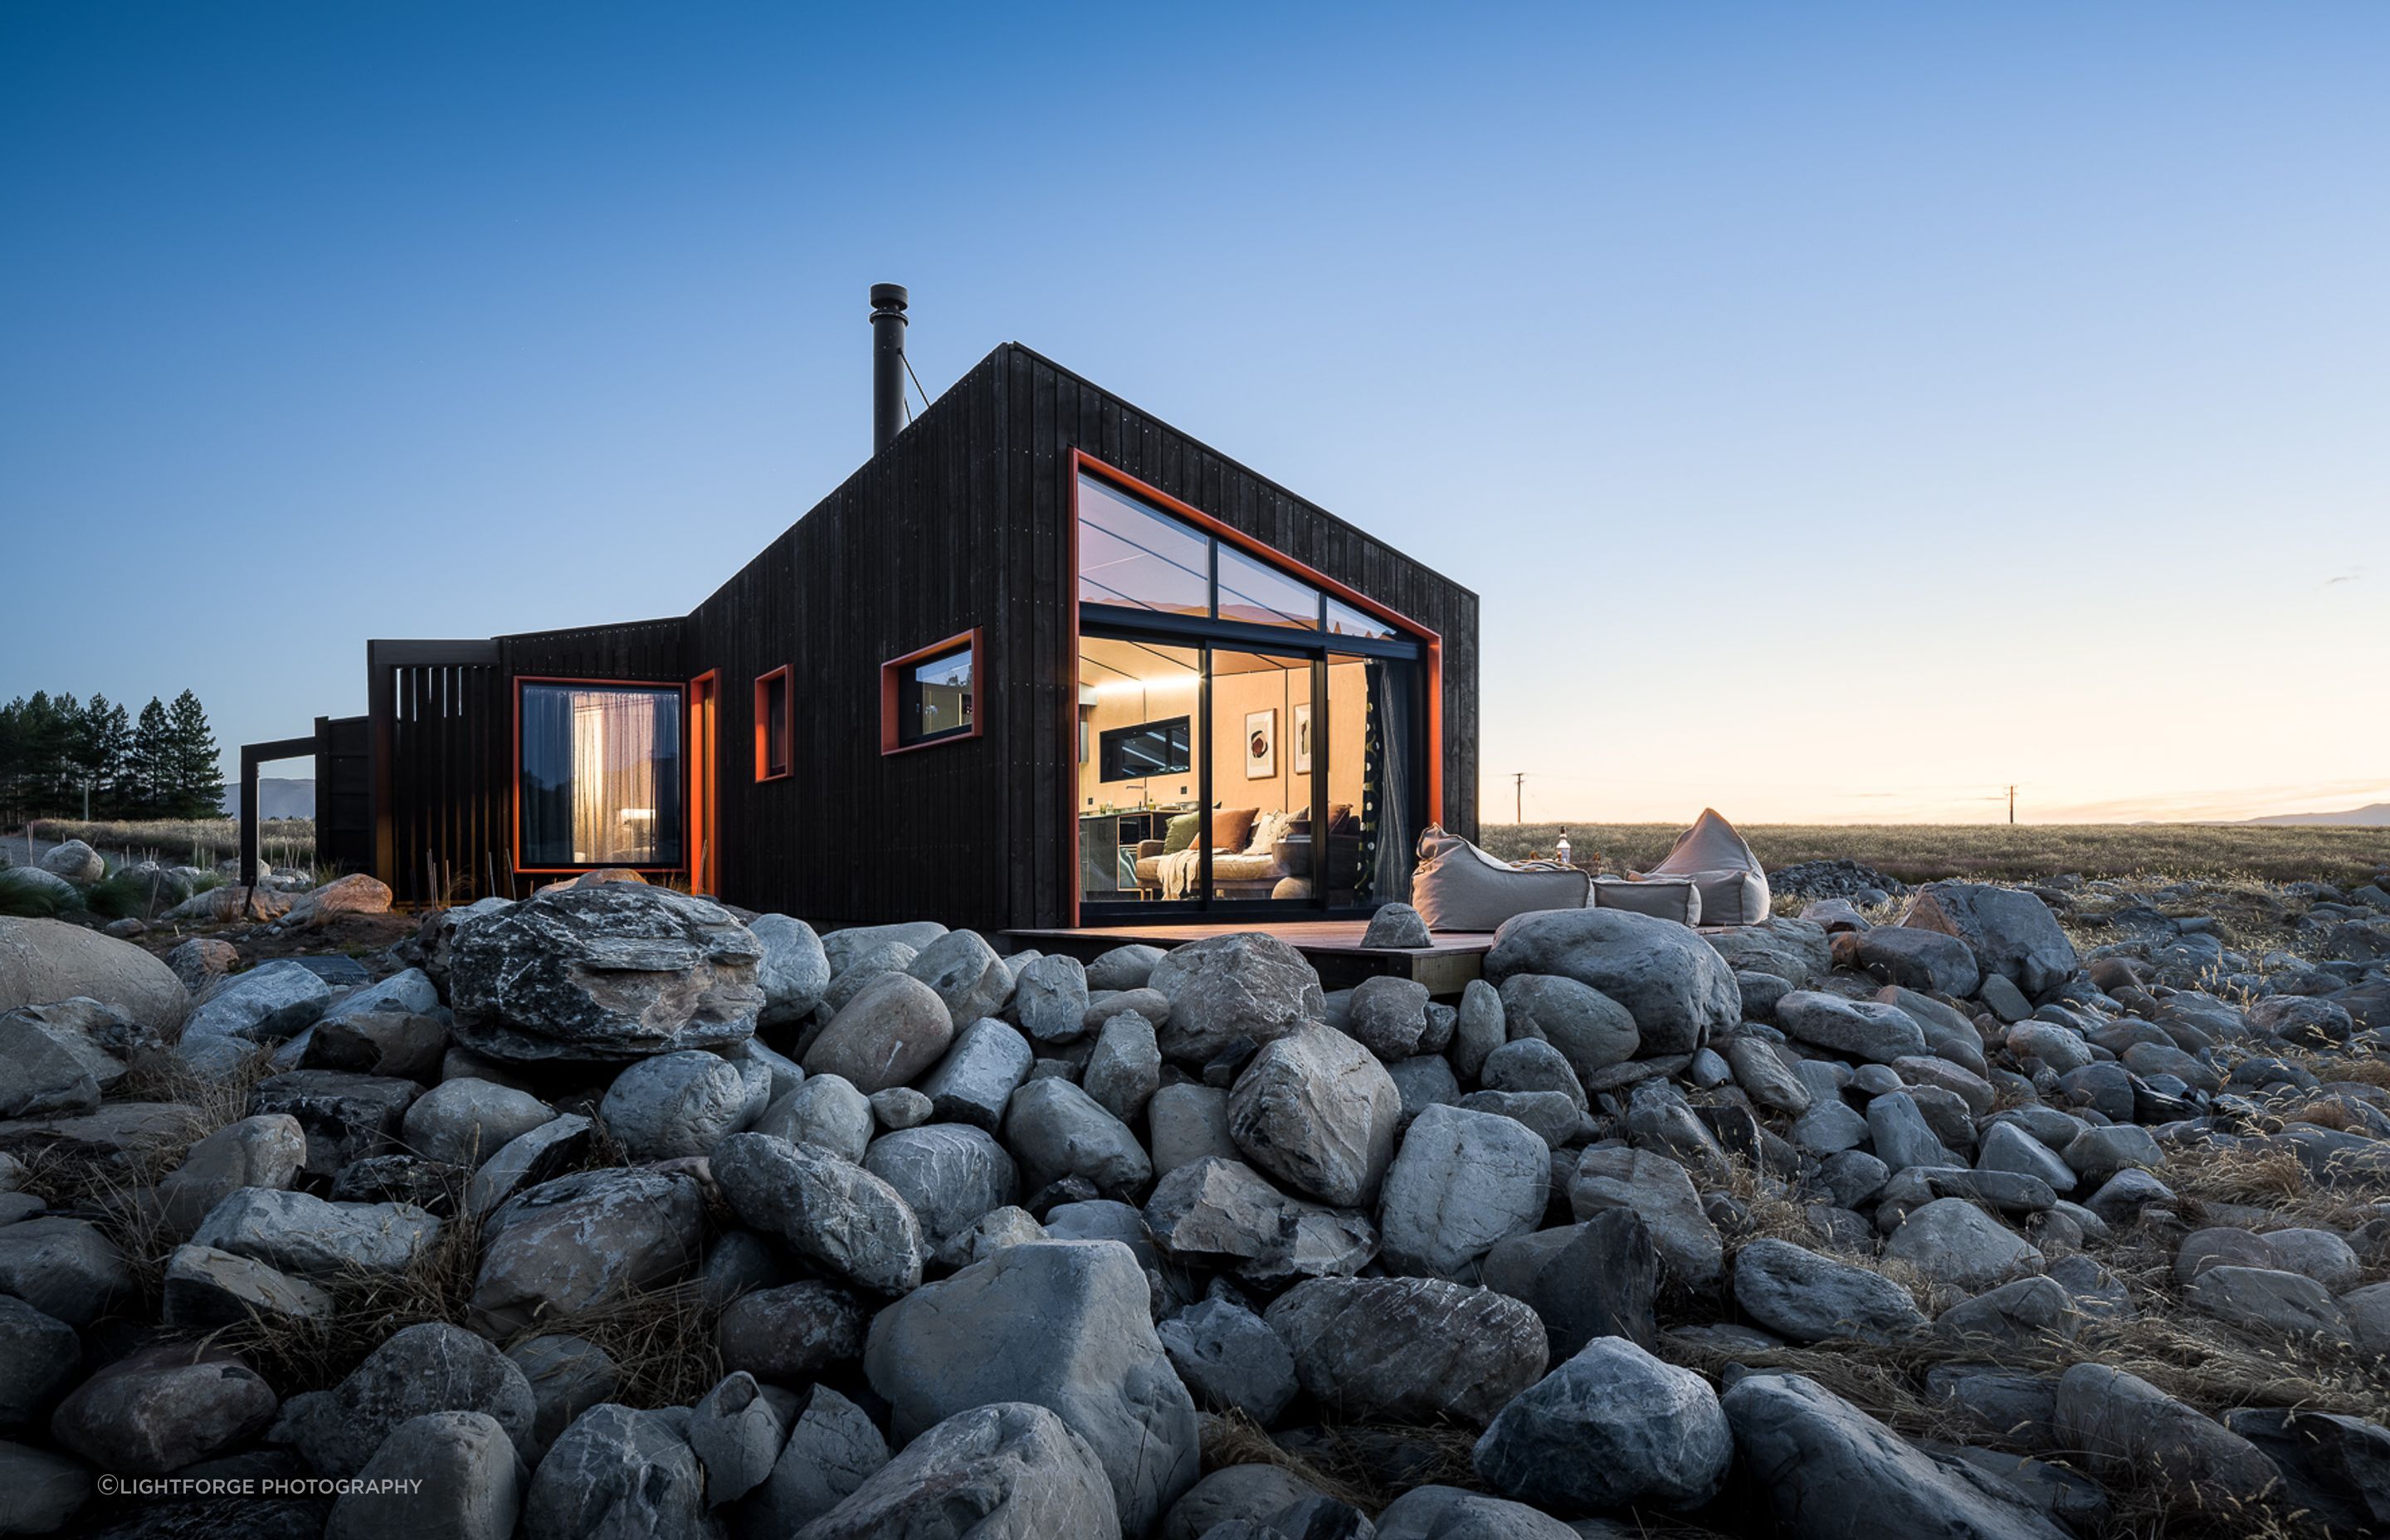 Skylark Cabin by Barry Connor Design is an immaculate example of a tiny home in an equally exquisite location - Photography: Lightforge